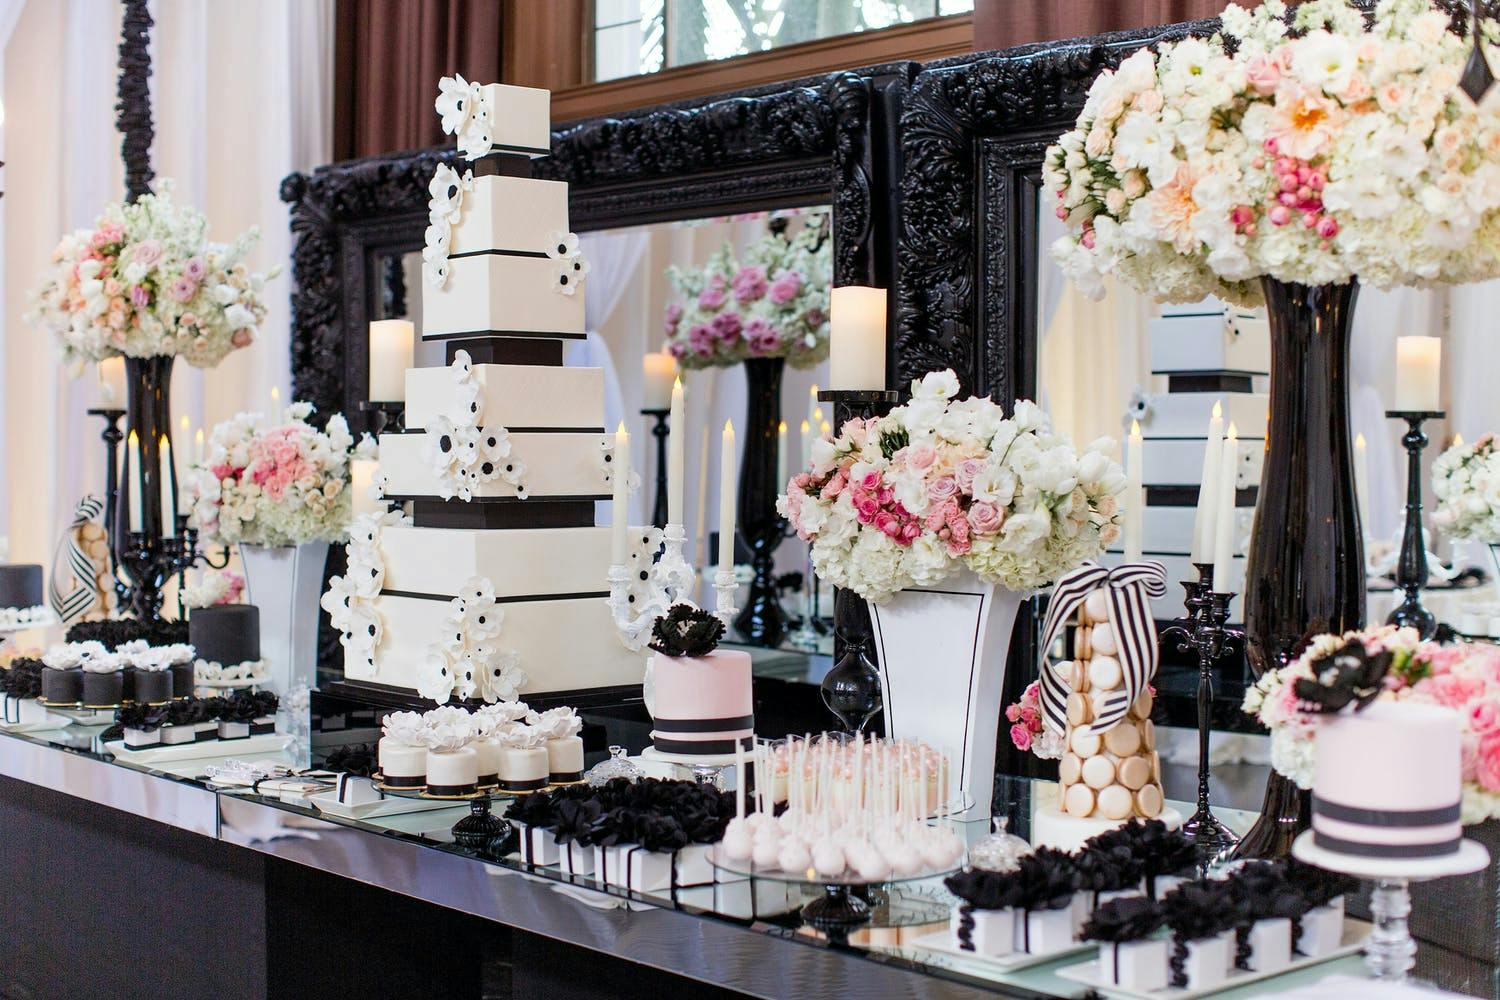 Black and White Wedding Cake and Other Dessert With Pink Floral Décor | PartySlate